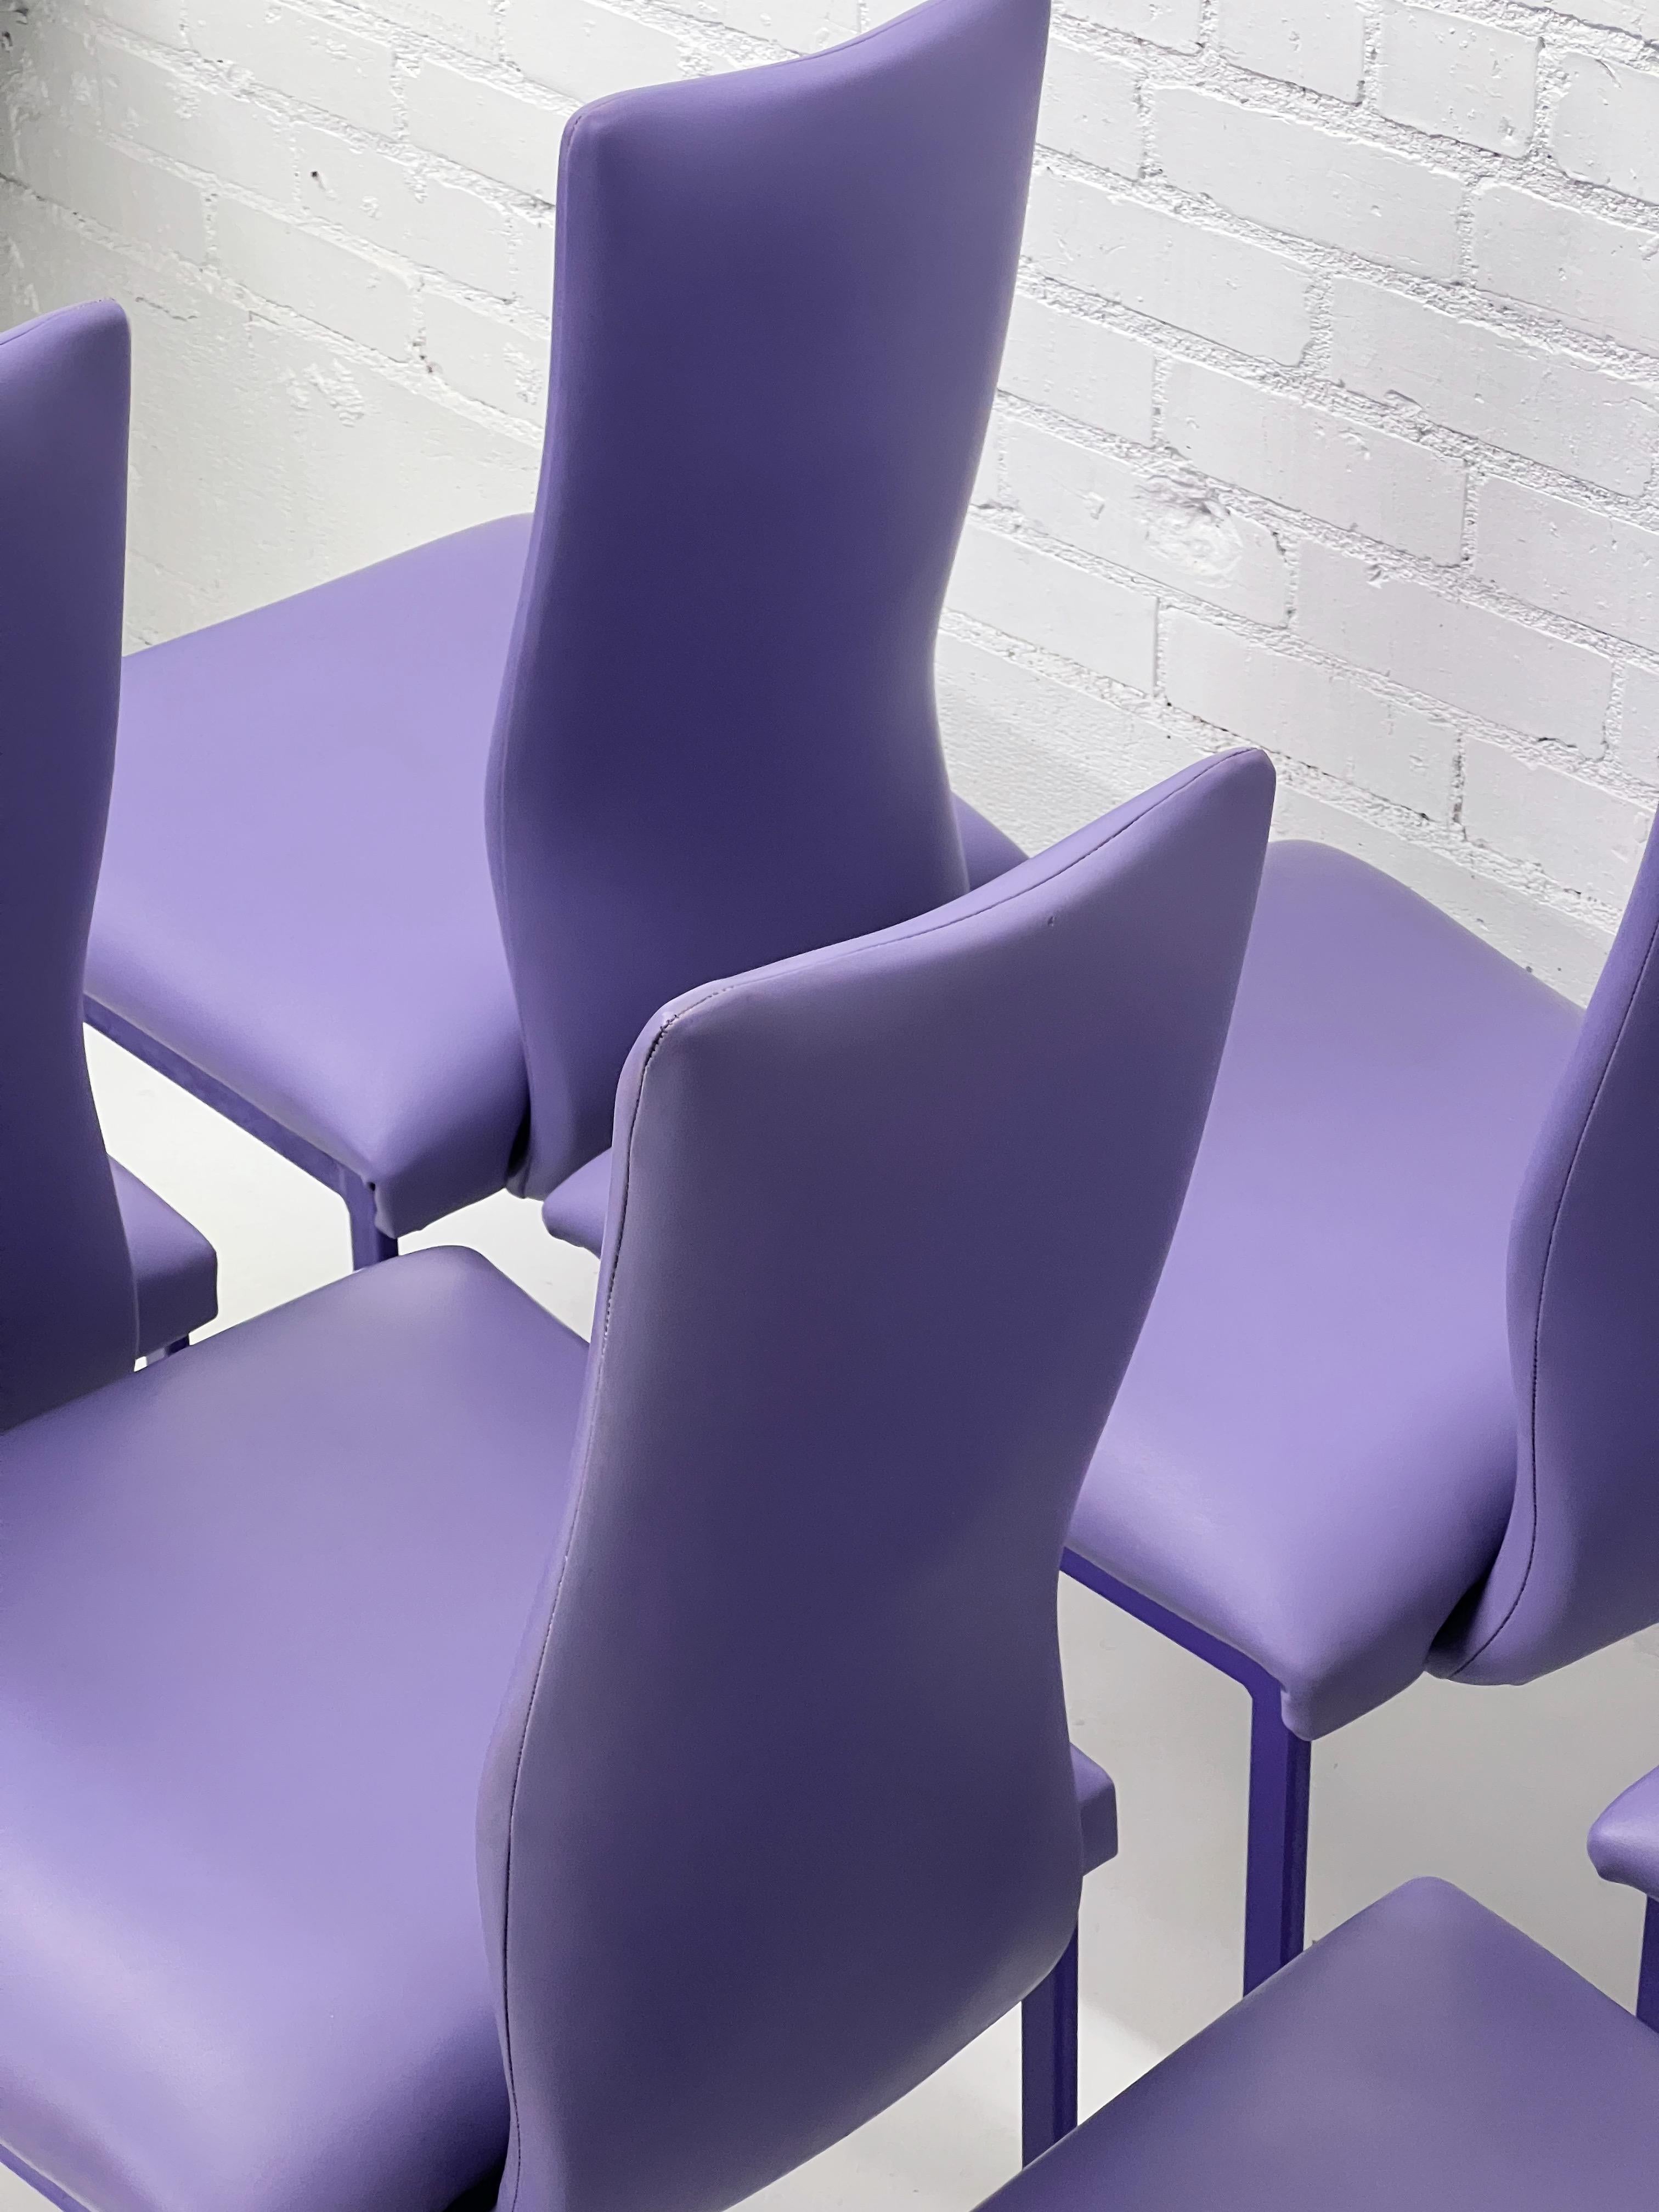 Minson Corp. Postmodern Sculptural Lavender Purple Chairs - Set of 6 In Fair Condition For Sale In Glendale, AZ